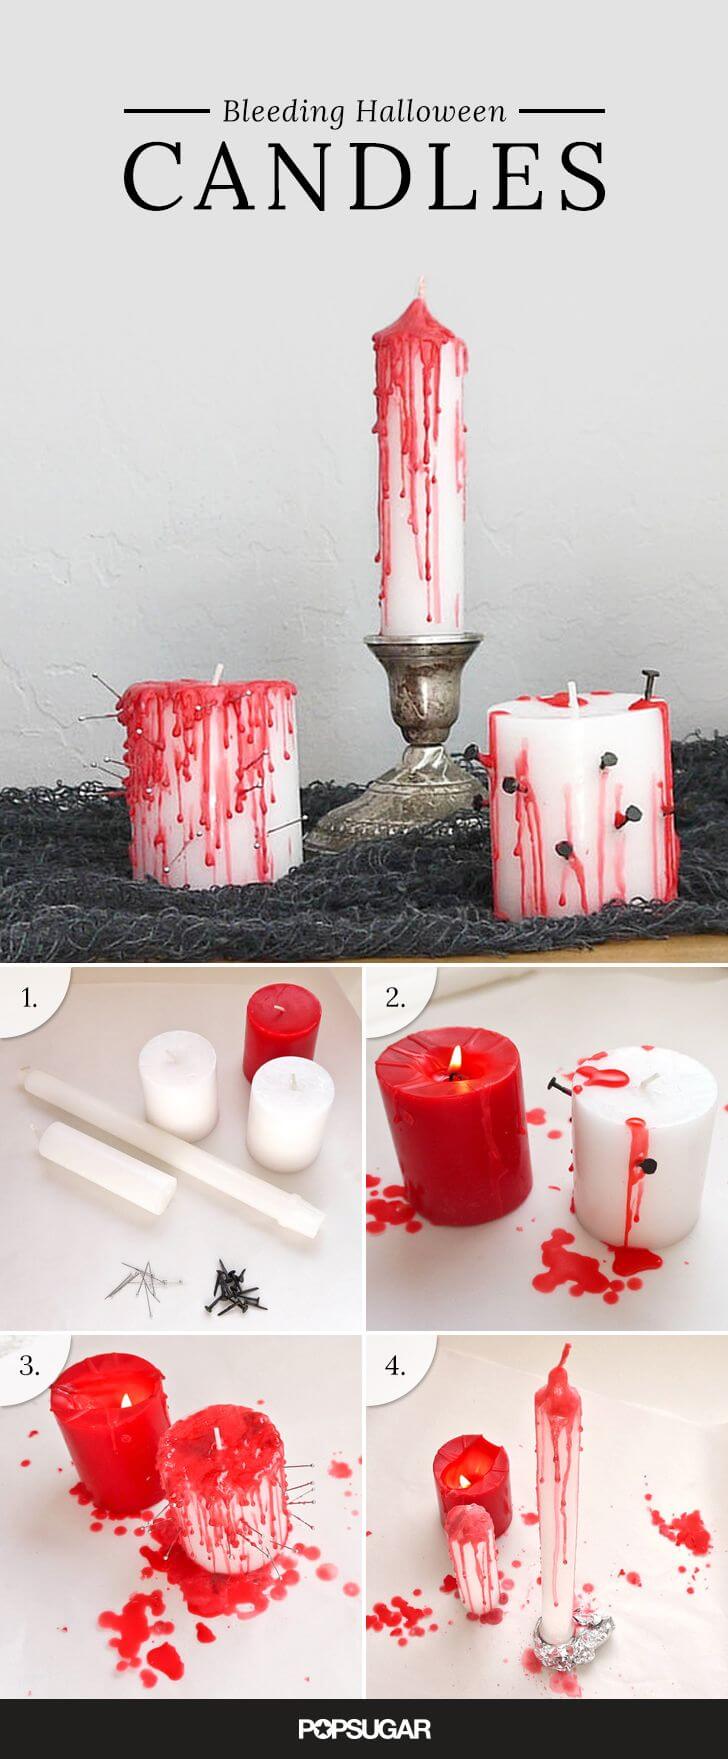 Bloody Candles without the Gore | DIY Indoor Halloween Decorating Ideas